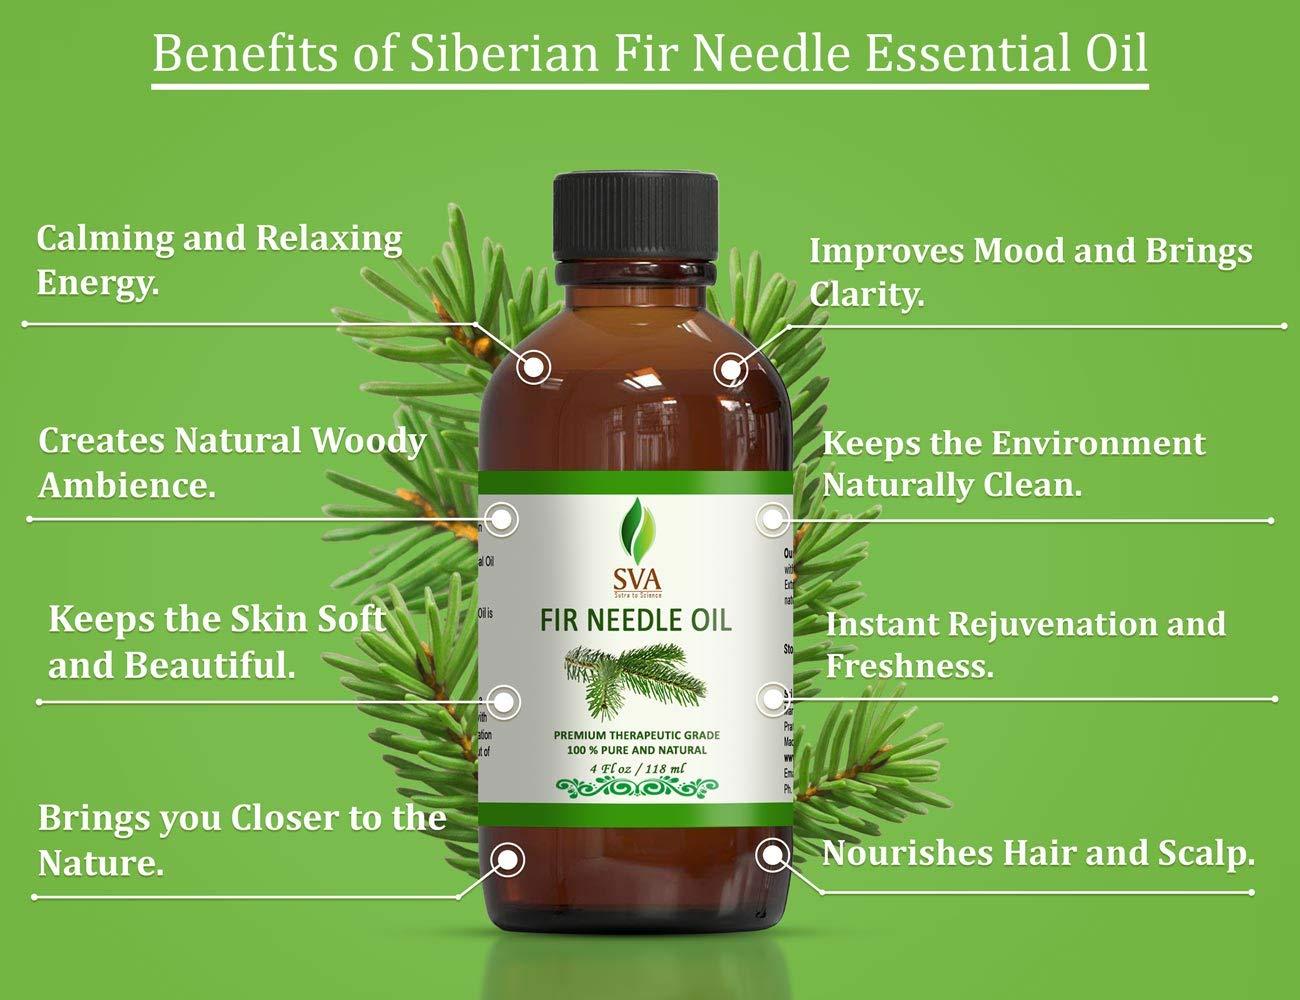 Fir Needle Essential Oils, how are they similar, how are they different –  Wingsets